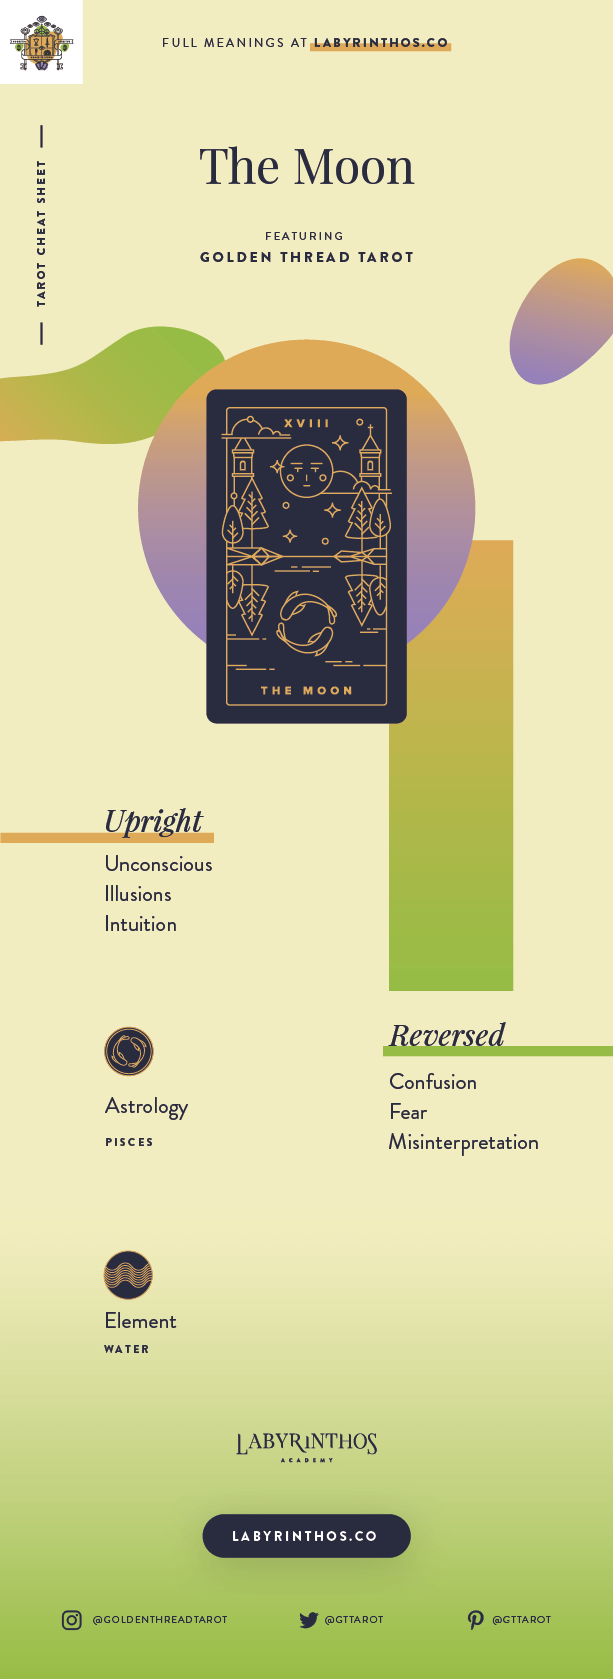 MEANING OF MOON CARD IN TAROT